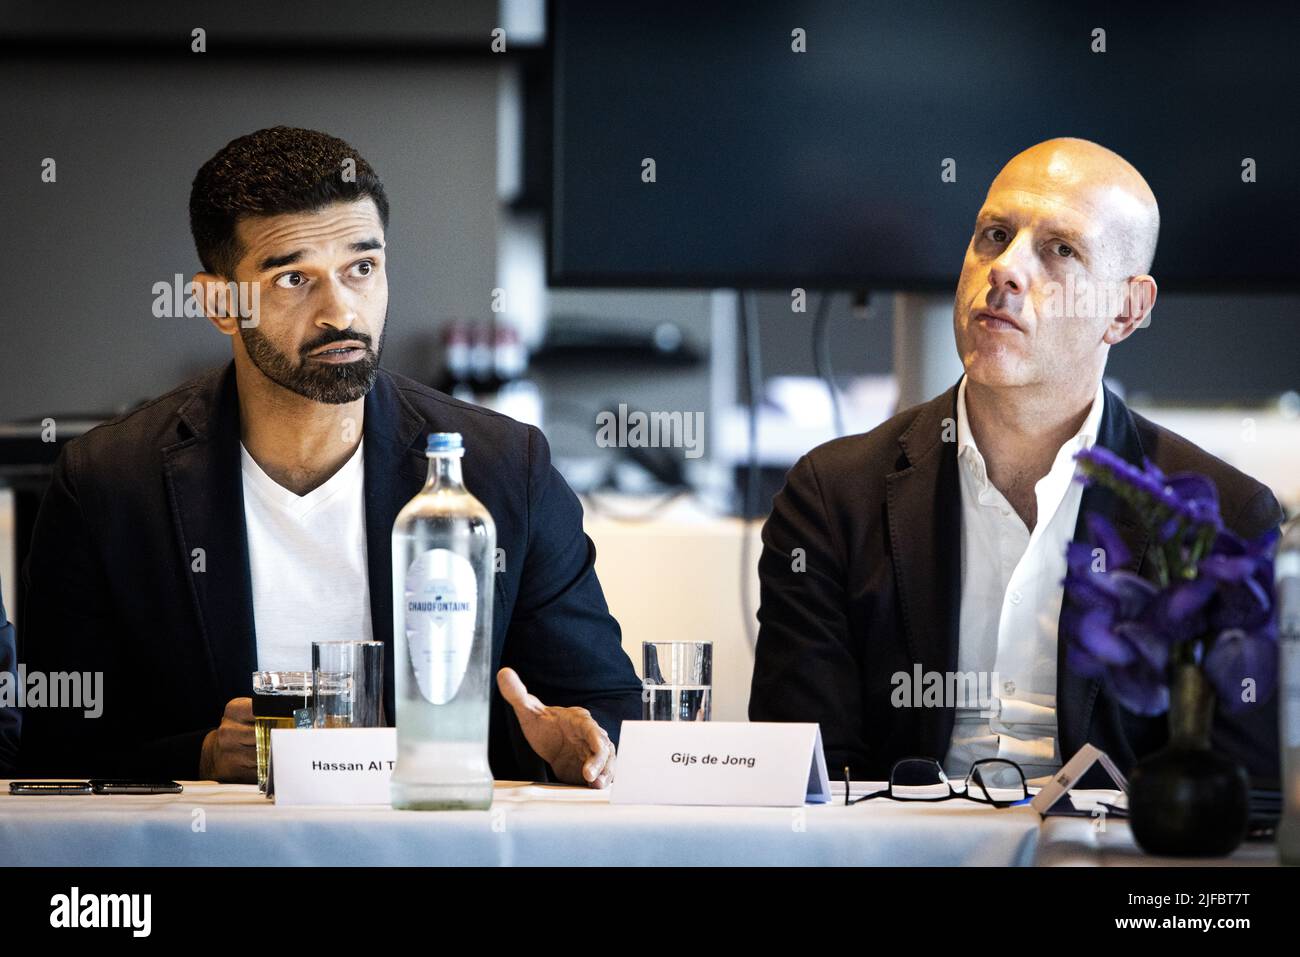 AMSTERDAM - Hassan Al Thawadi, secretary-general of the organizing committee of the World Cup in Qatar, and Gijs de Jong (r) of the KNVB during a meeting in the Johan Cruijff Arena. ANP RAMON VAN FLYMEN Stock Photo